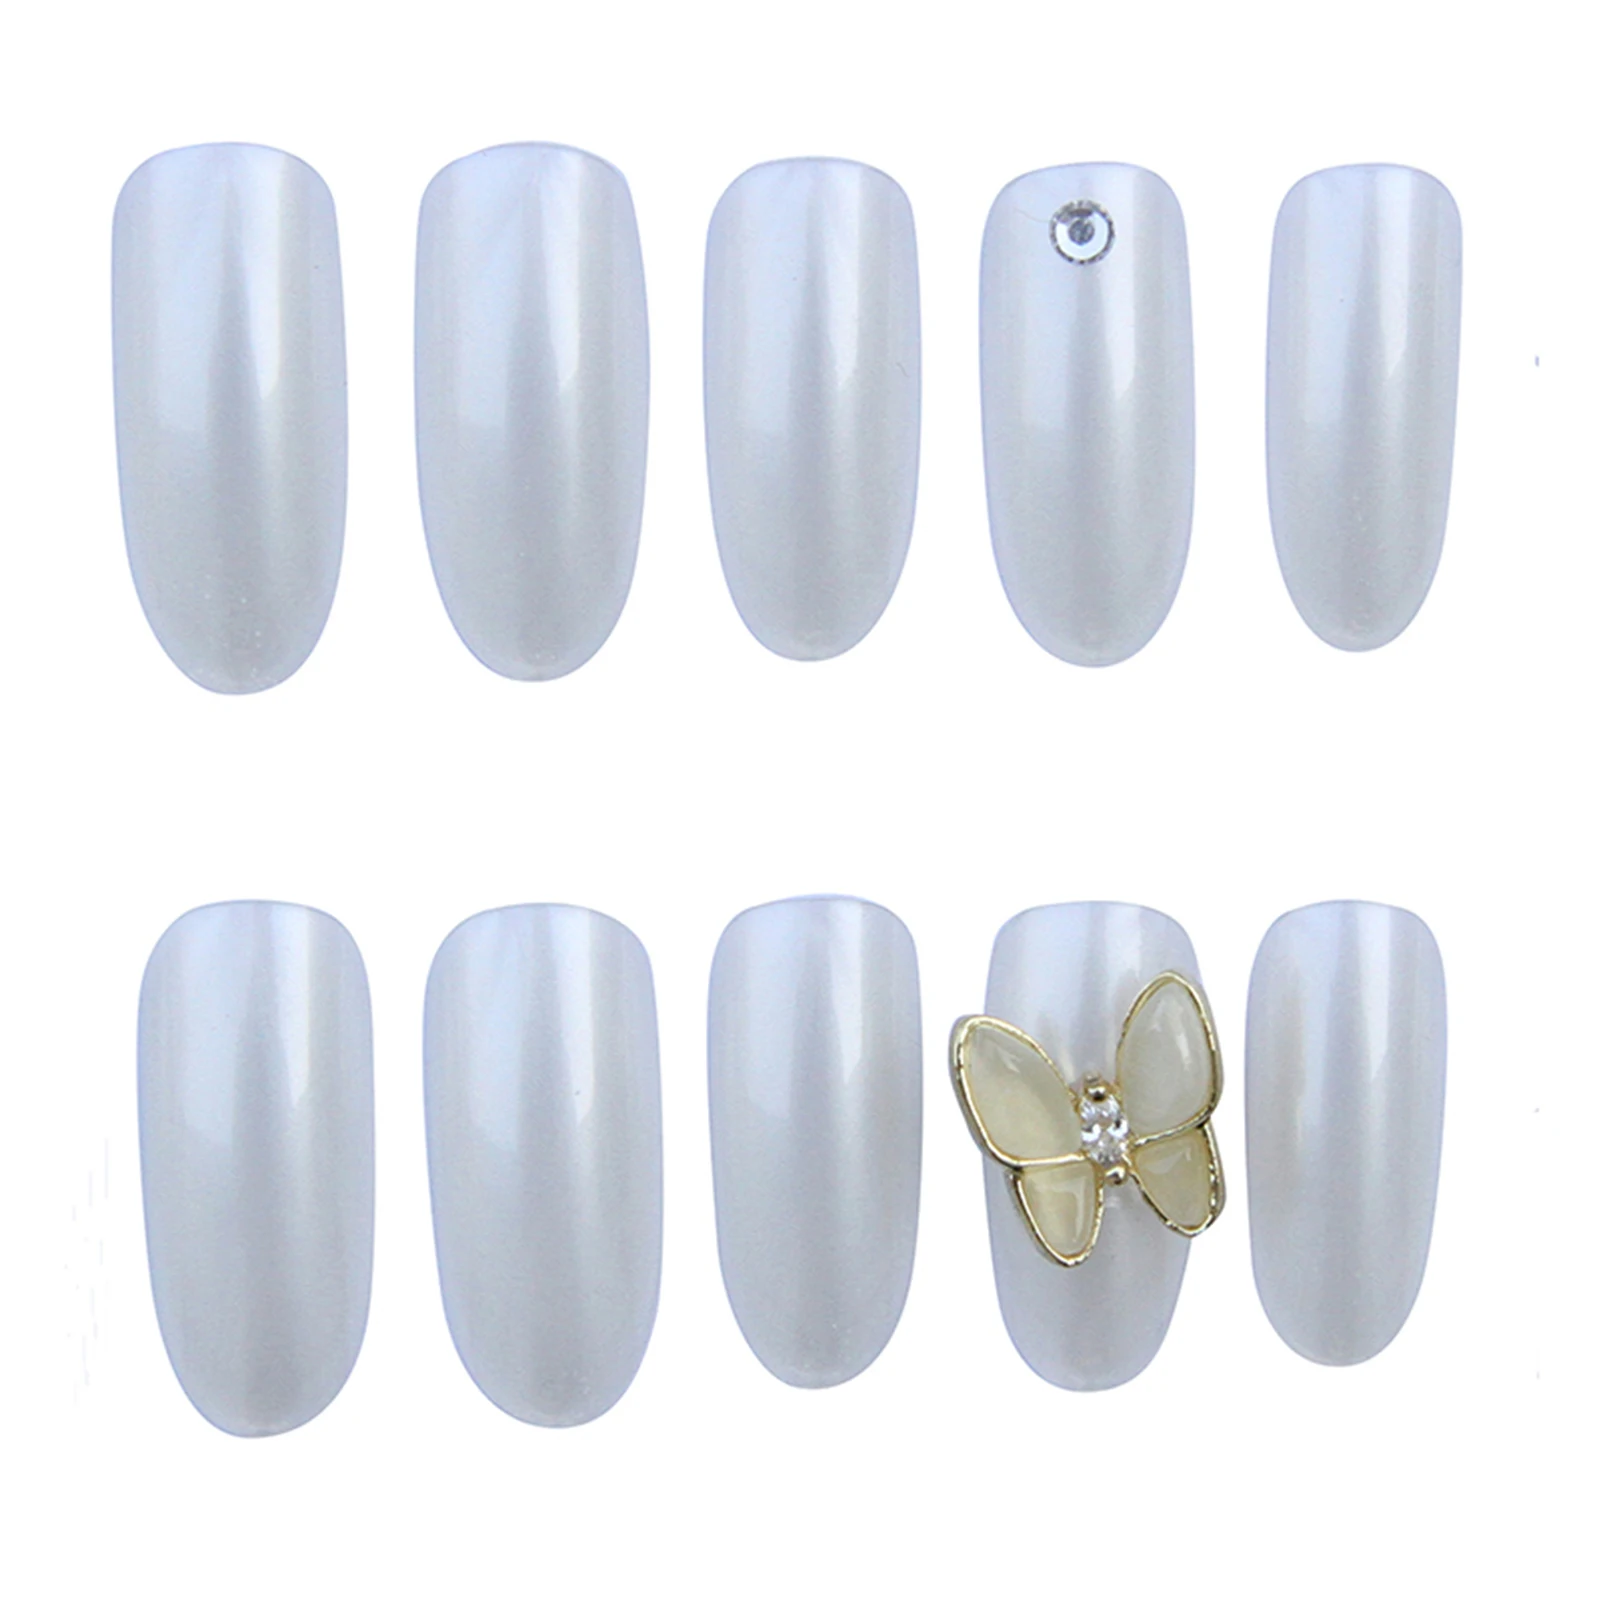 

24pcs Bow Fake Nail Patch Glue Type Removable Long Paragraph Fashion Manicure Save Time False Nails Patch Capsules Ongle